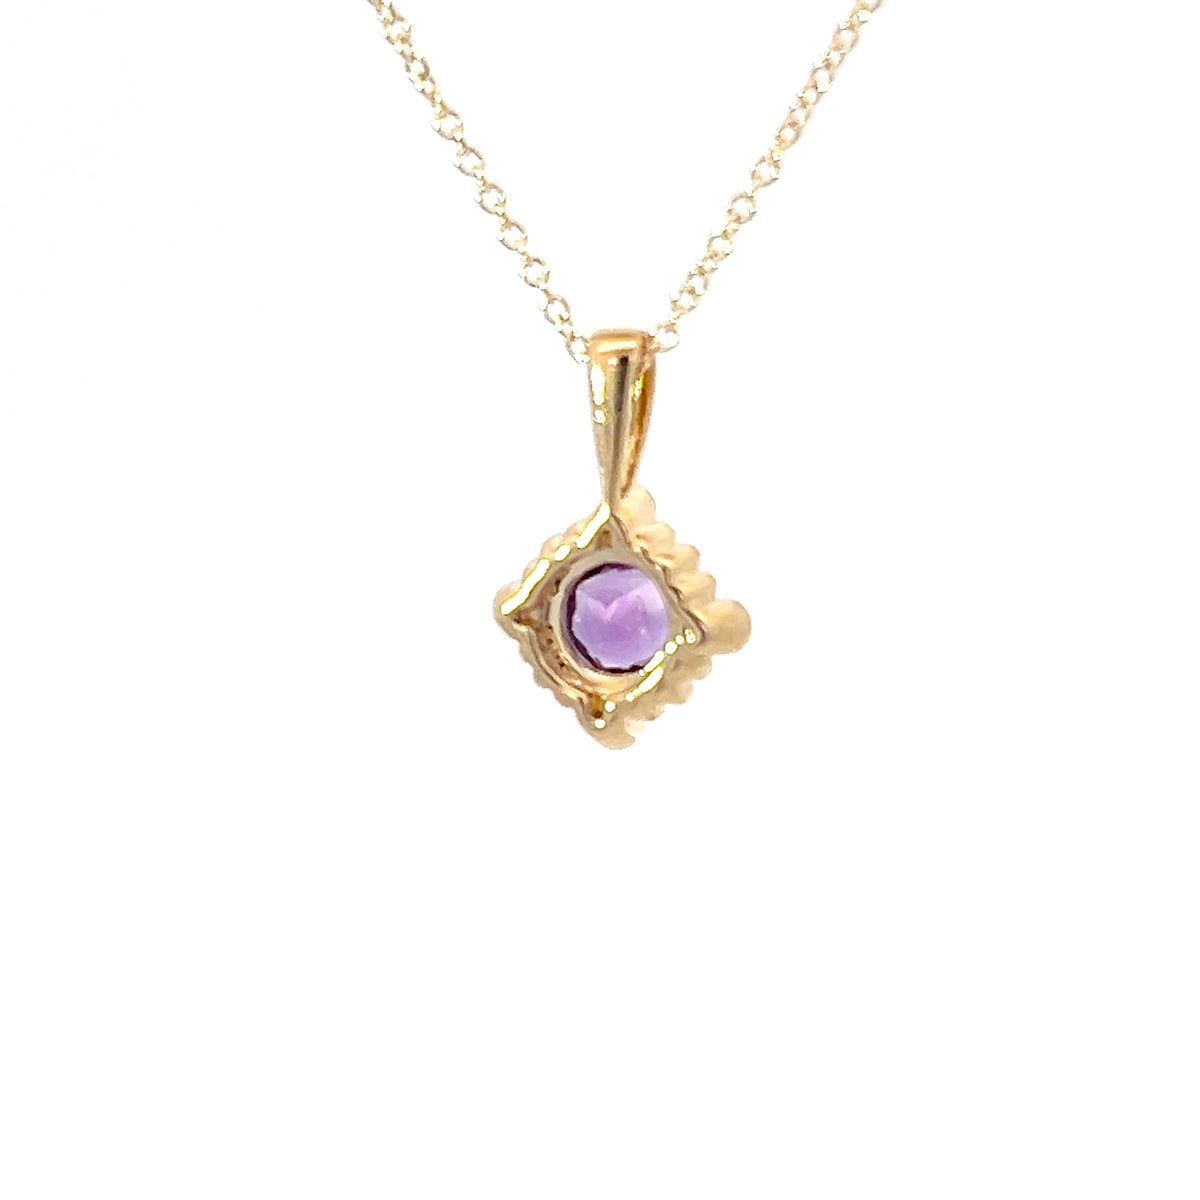 10K Yellow Gold Amethyst and Diamond Pendant - 18 inches